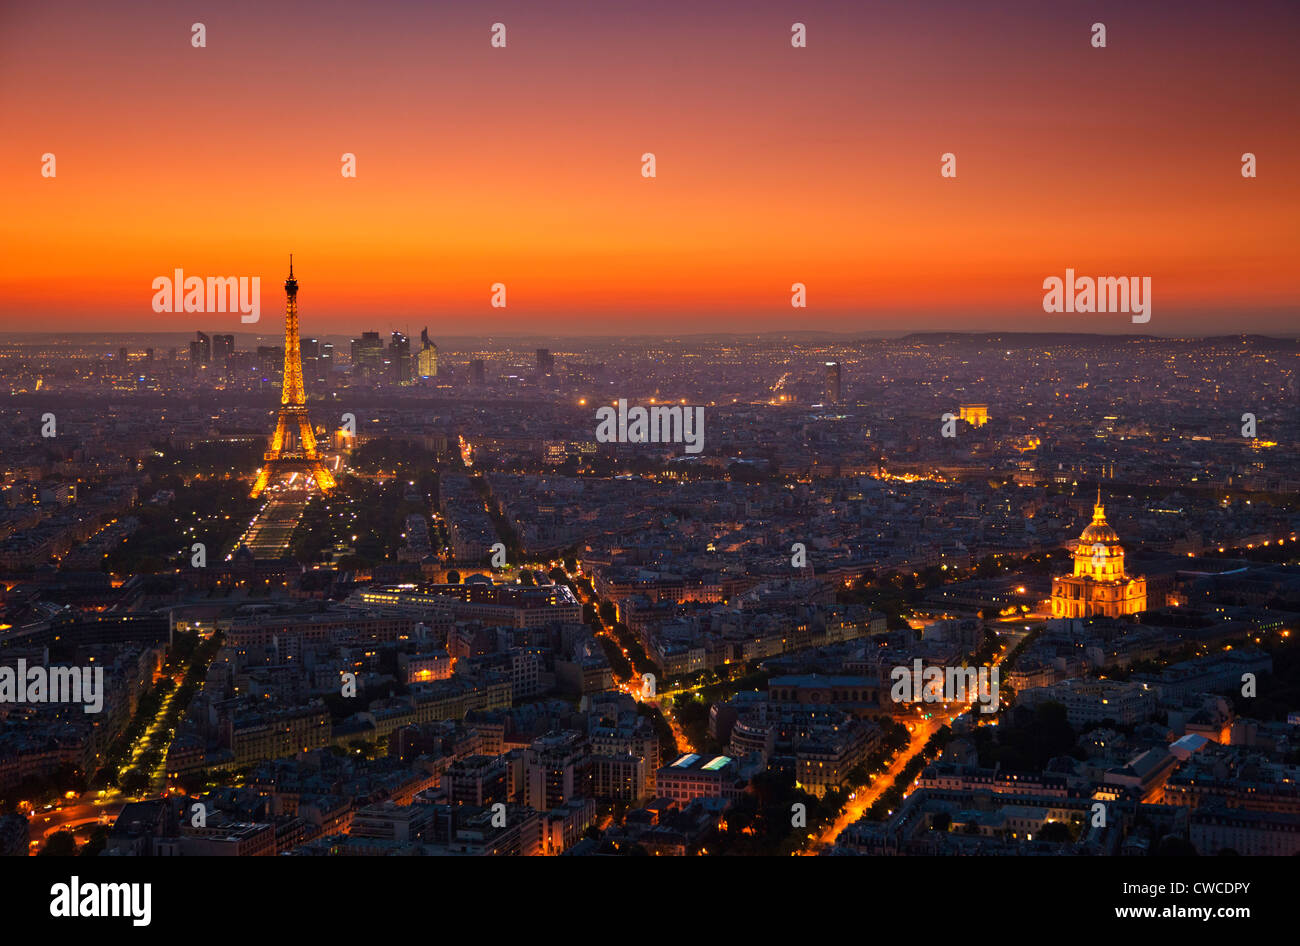 Paris skyline at sunset showing the Eiffel tower and surrounding areas France EU Europe Stock Photo